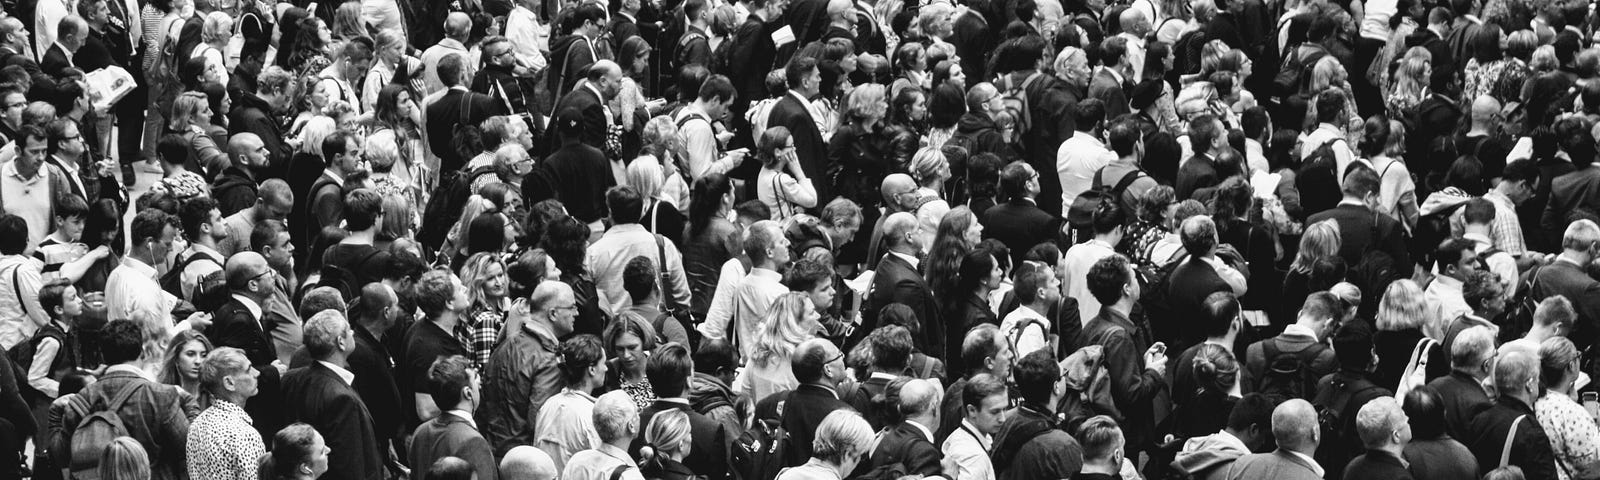 Crowd of people in black and white